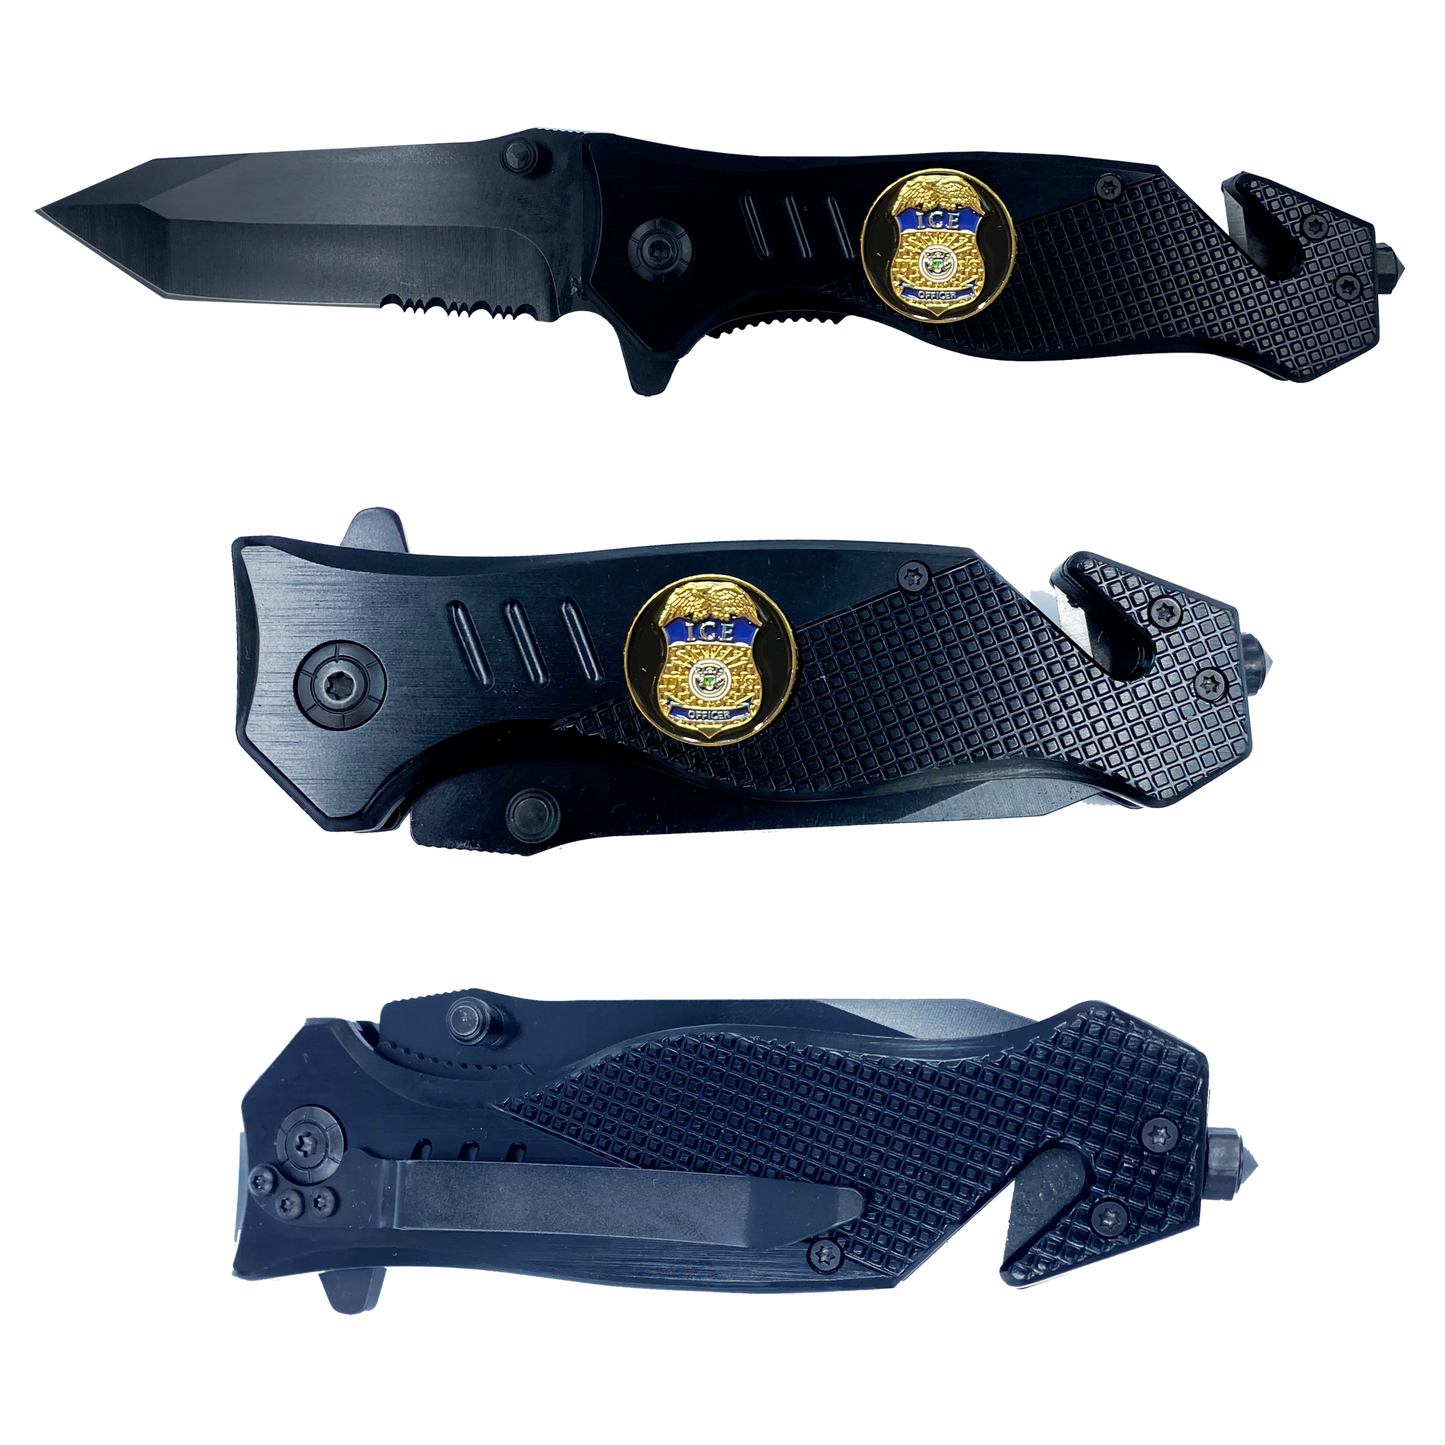 ICE officer collectible 3-in-1 Police Tactical Rescue knife tool with Seatbelt Cutter, Steel Serrated Blade, Glass Breaker